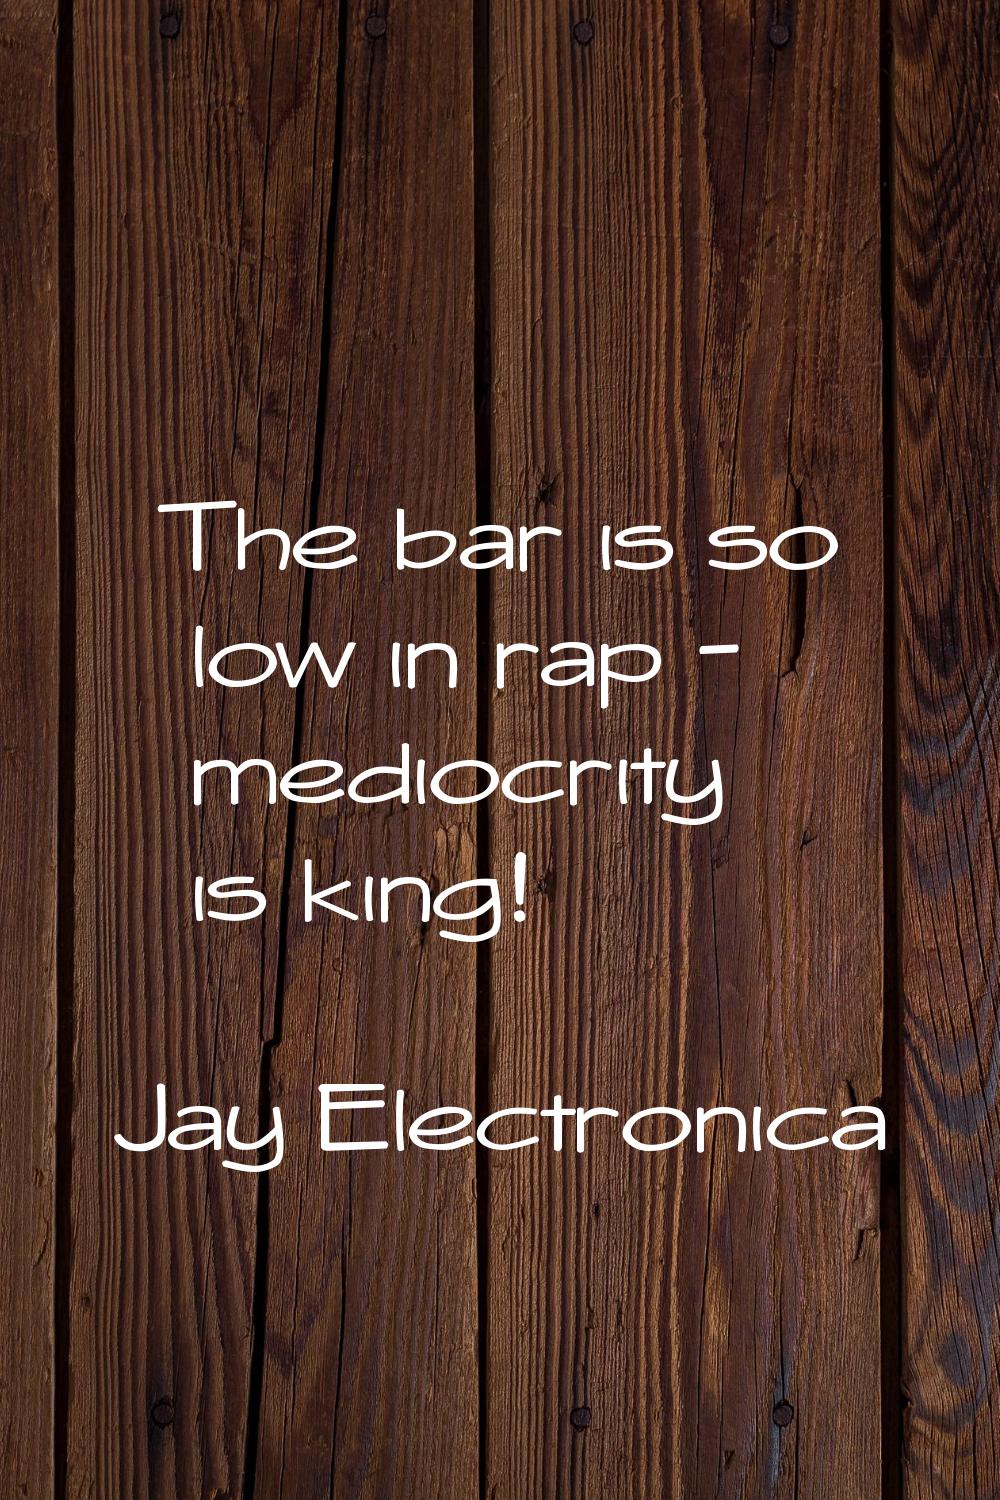 The bar is so low in rap - mediocrity is king!